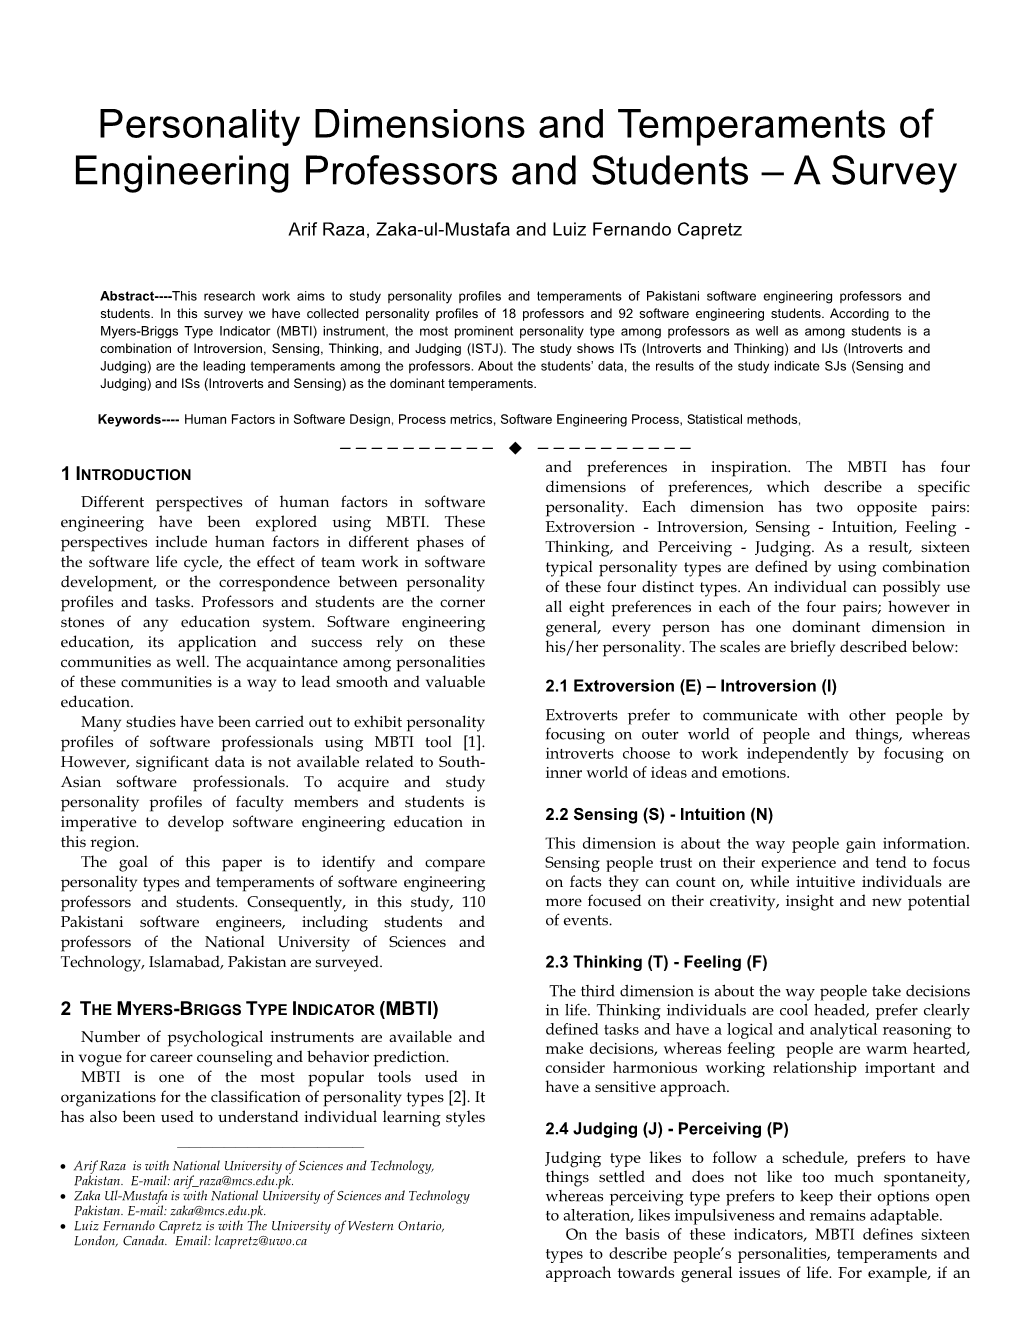 Personality Dimensions and Temperaments of Engineering Professors and Students – a Survey